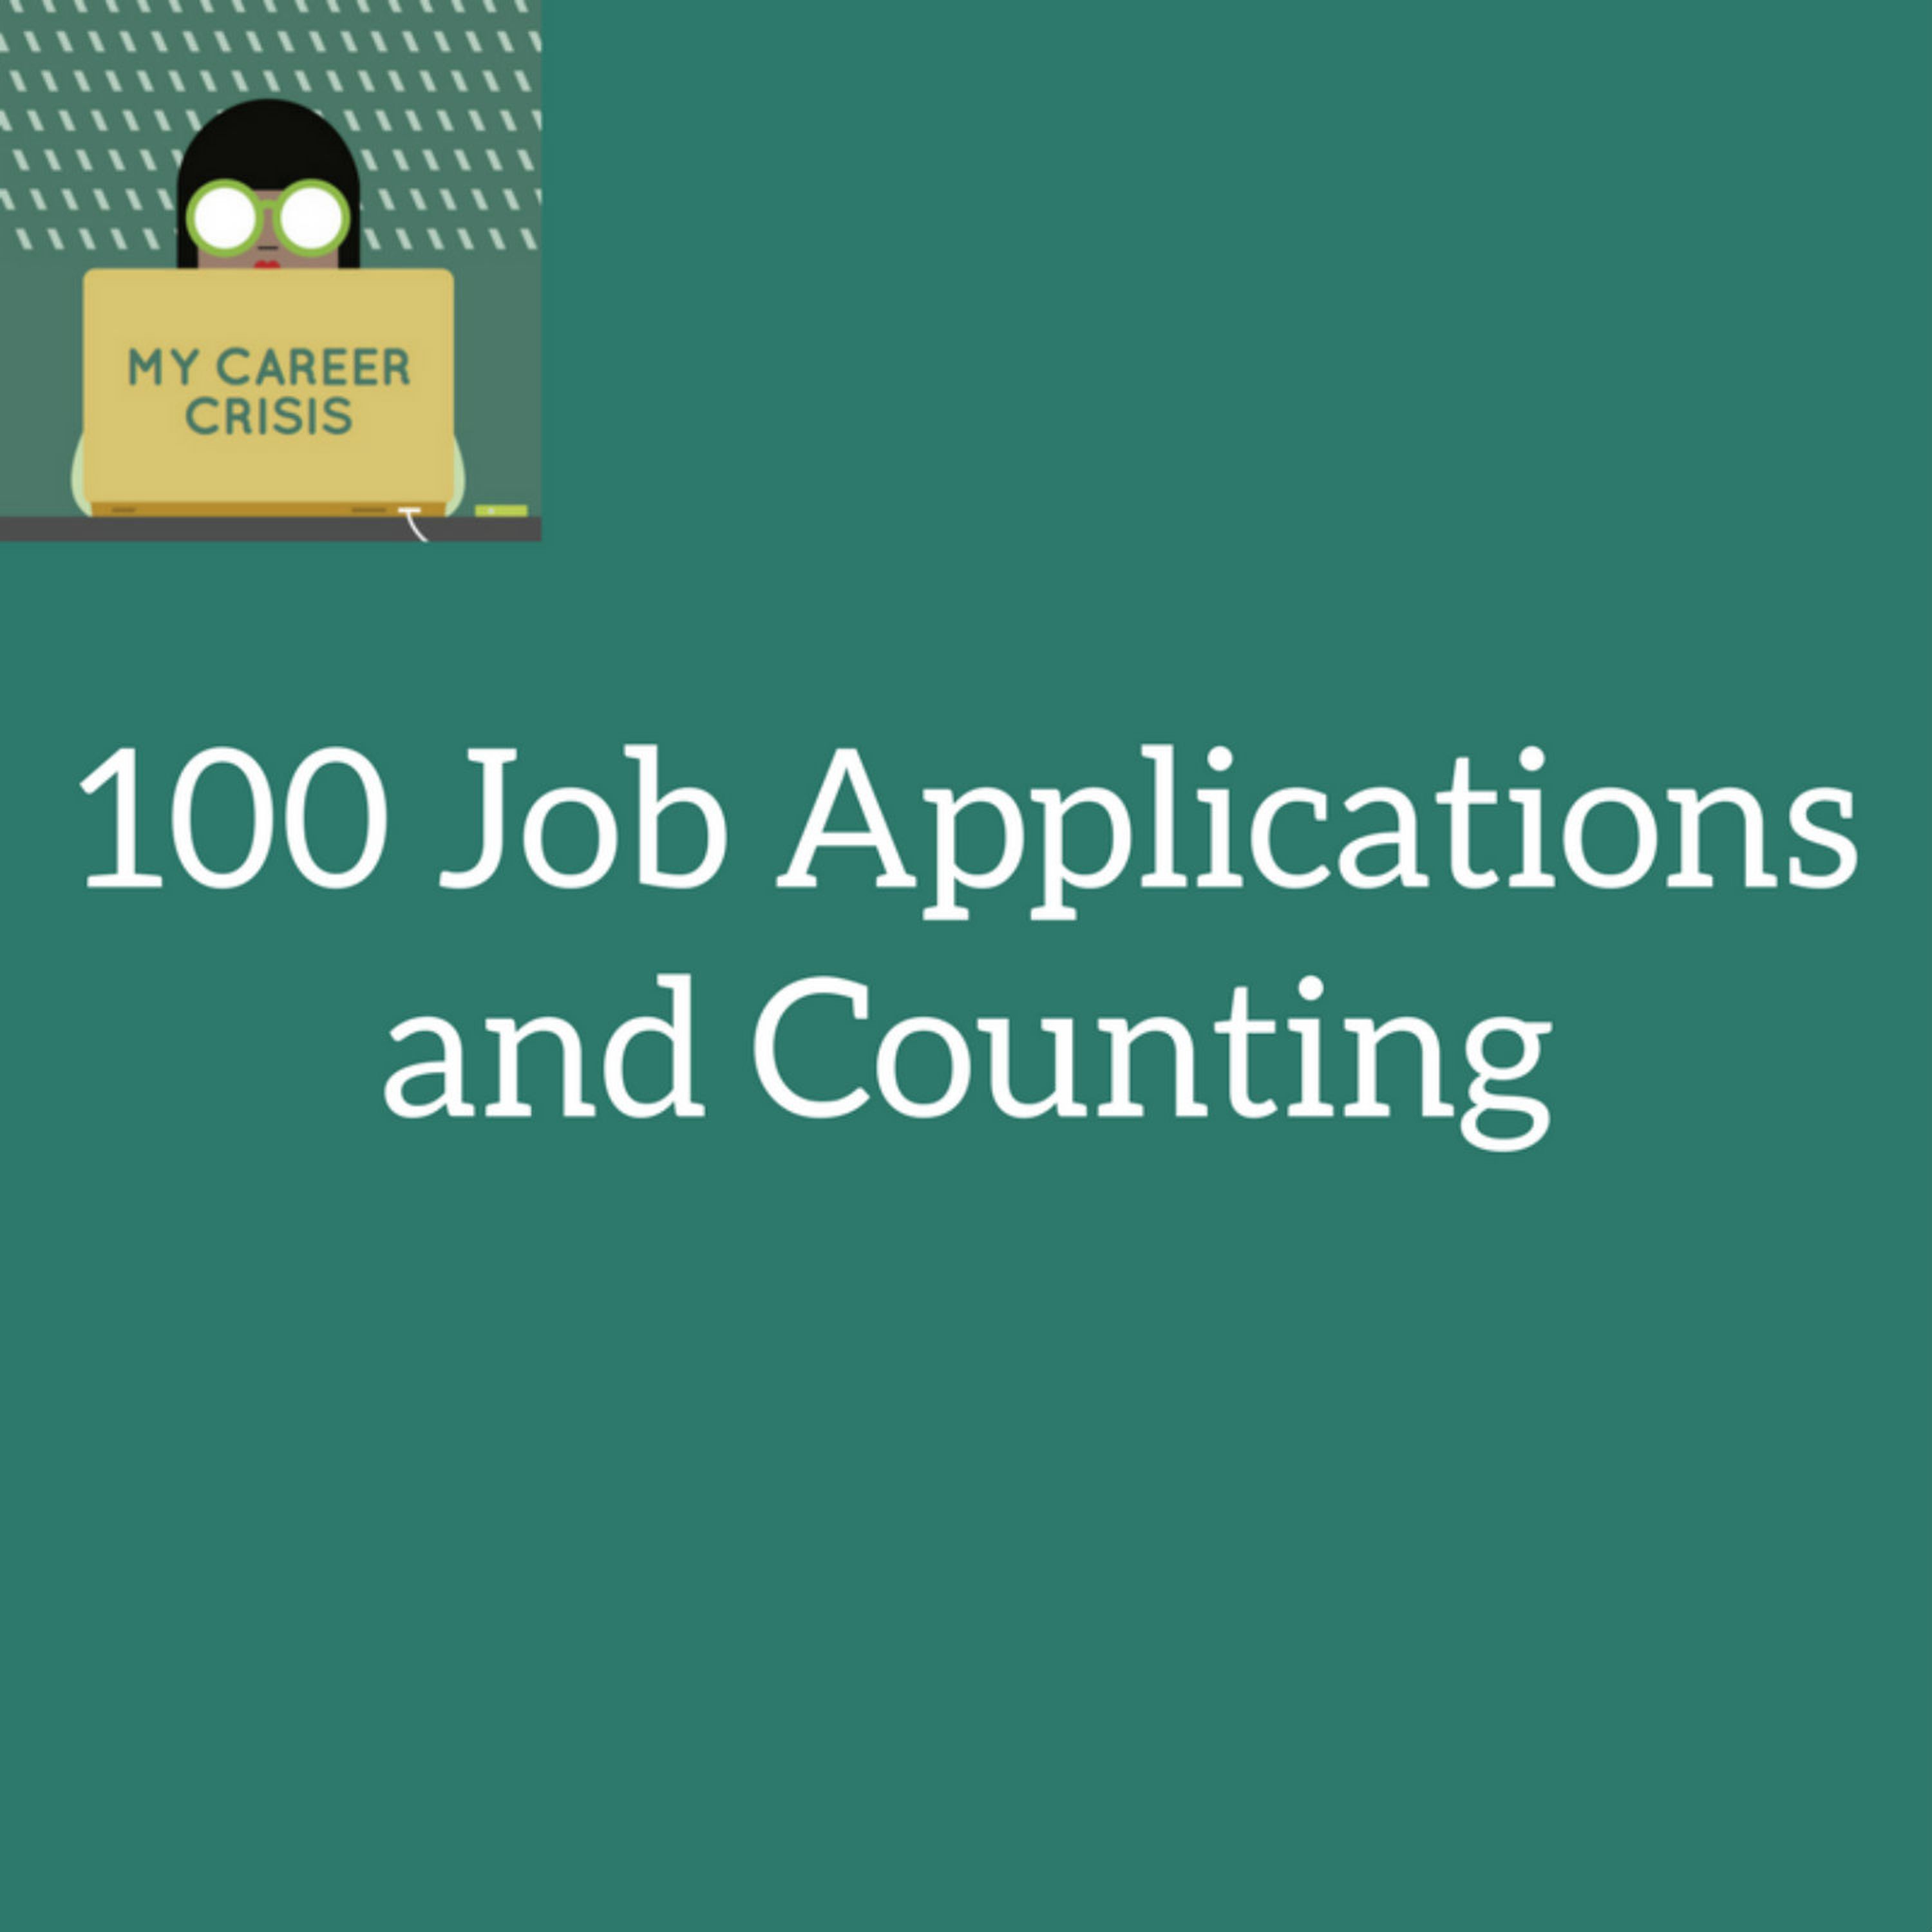 100 Job Applications and Counting